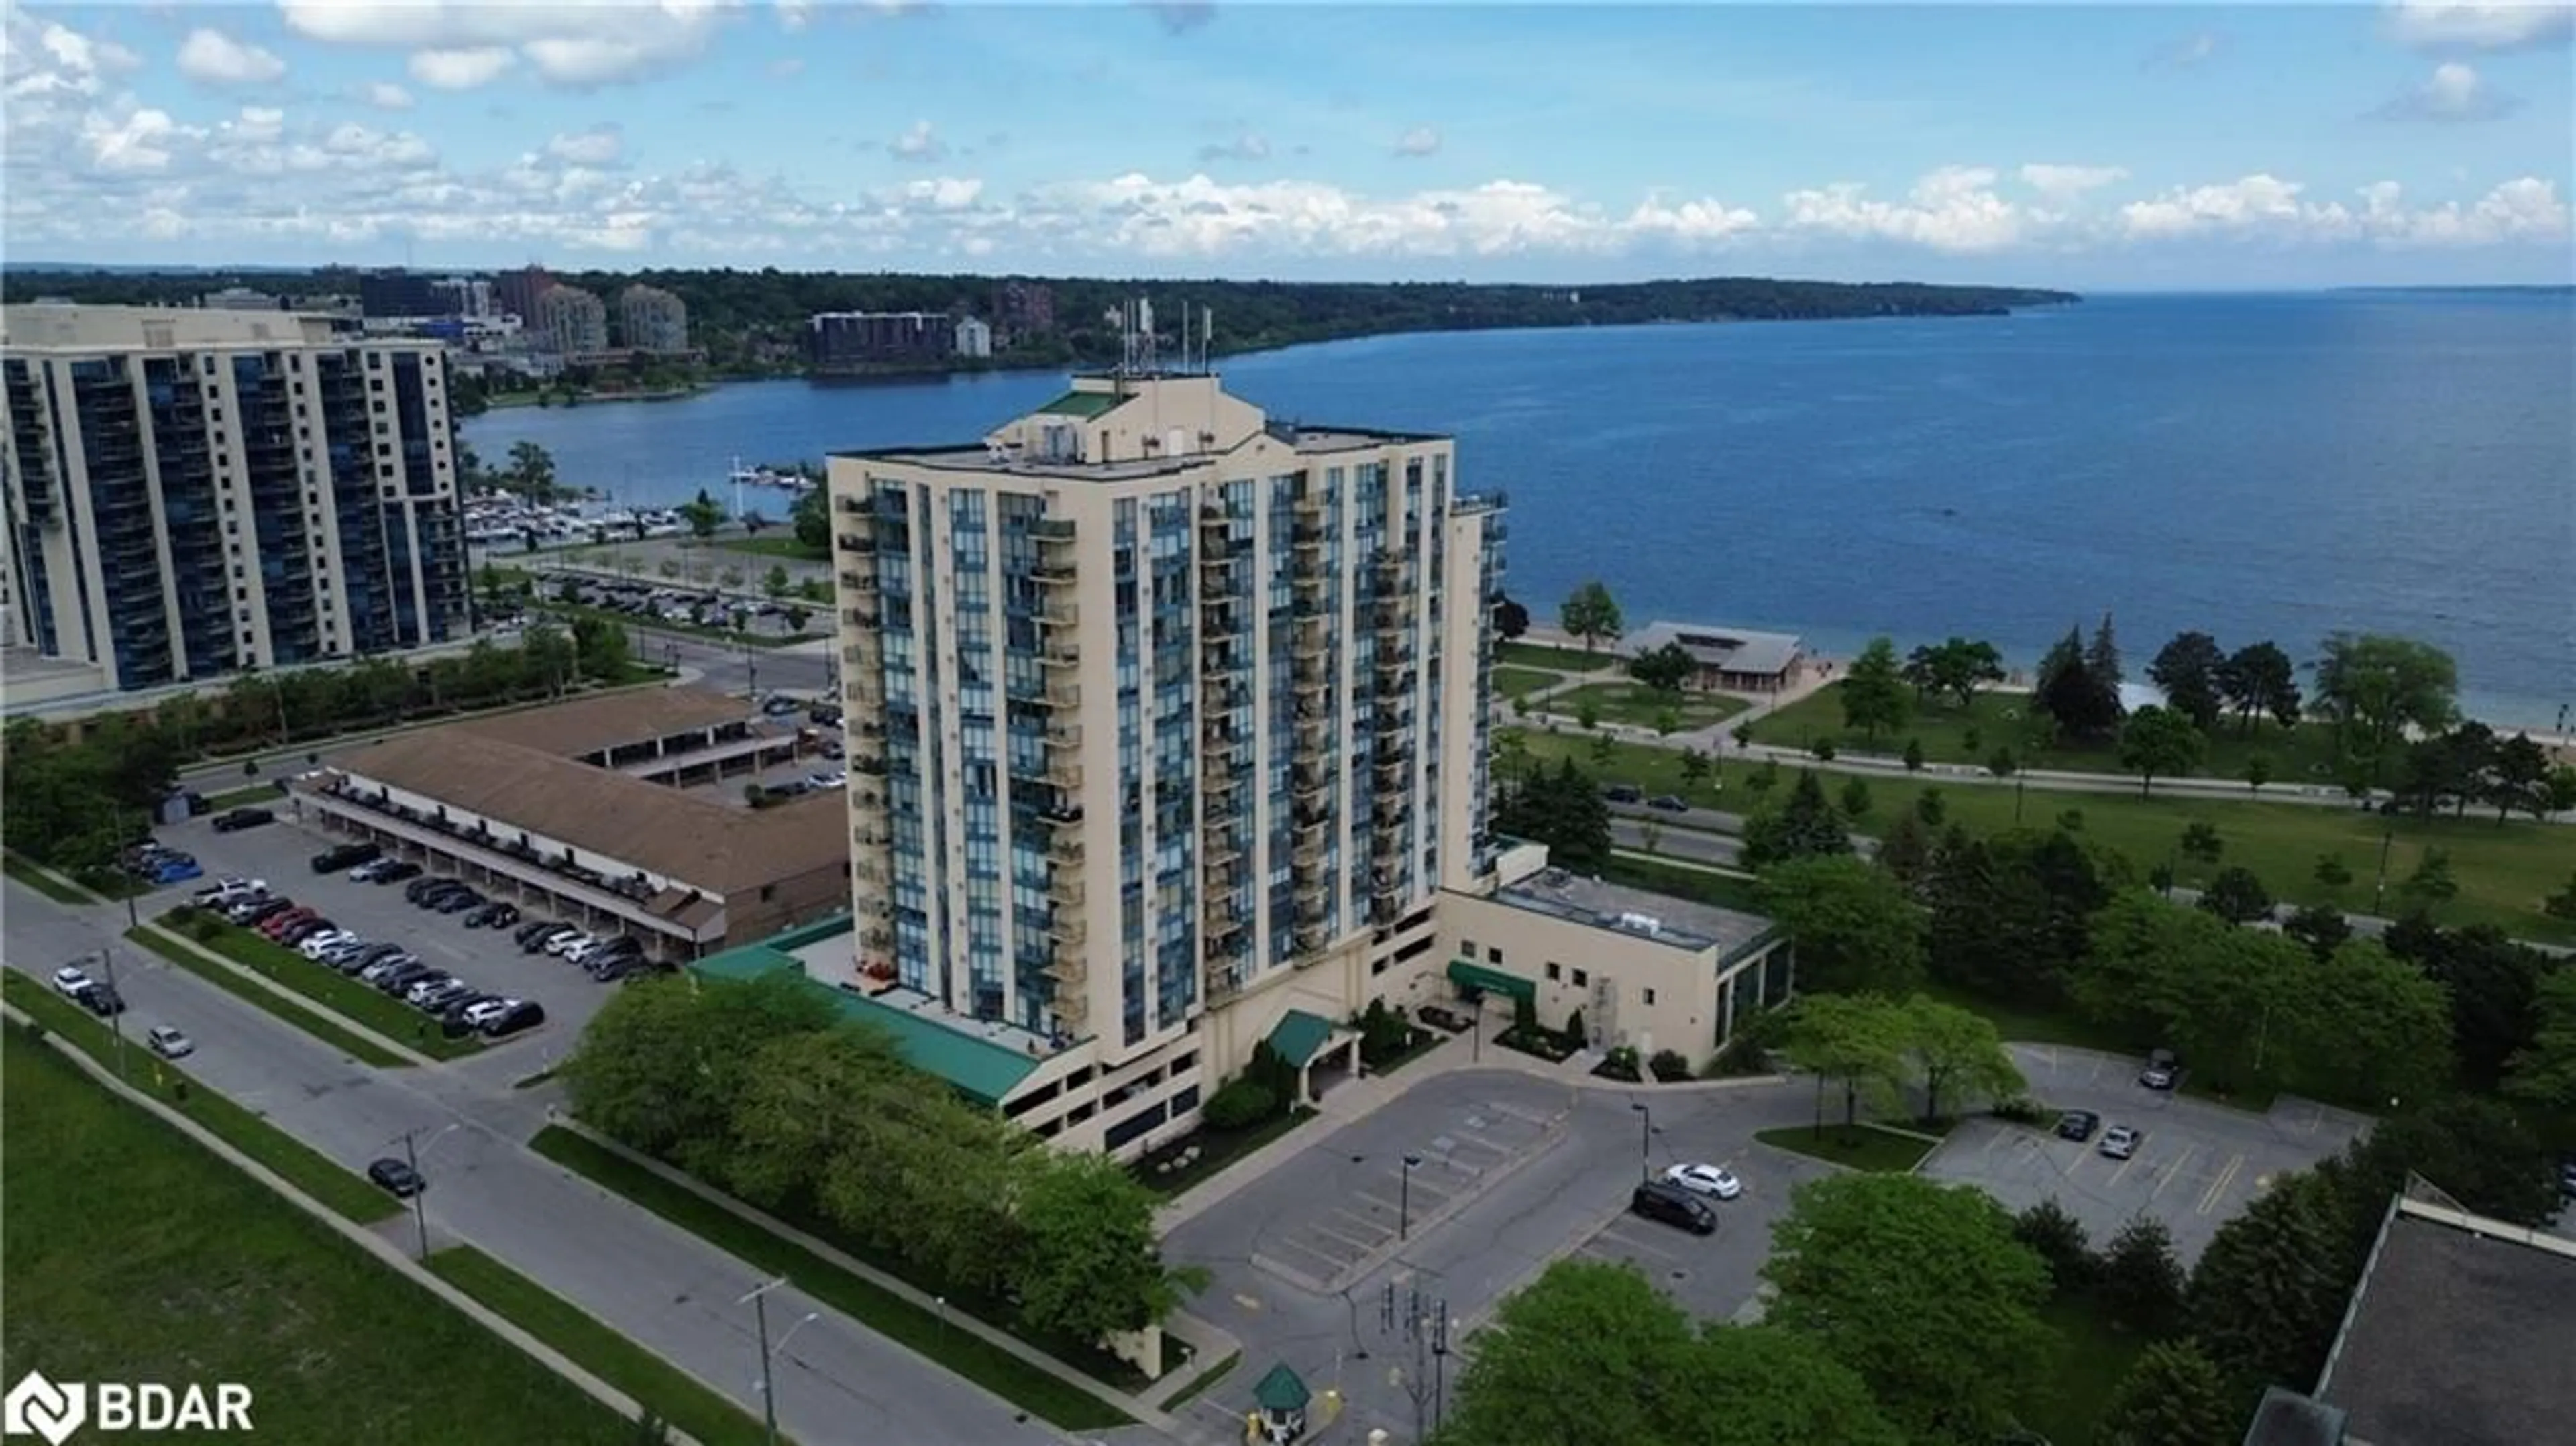 Lakeview for 65 Ellen St #808, Barrie Ontario L4N 3A5